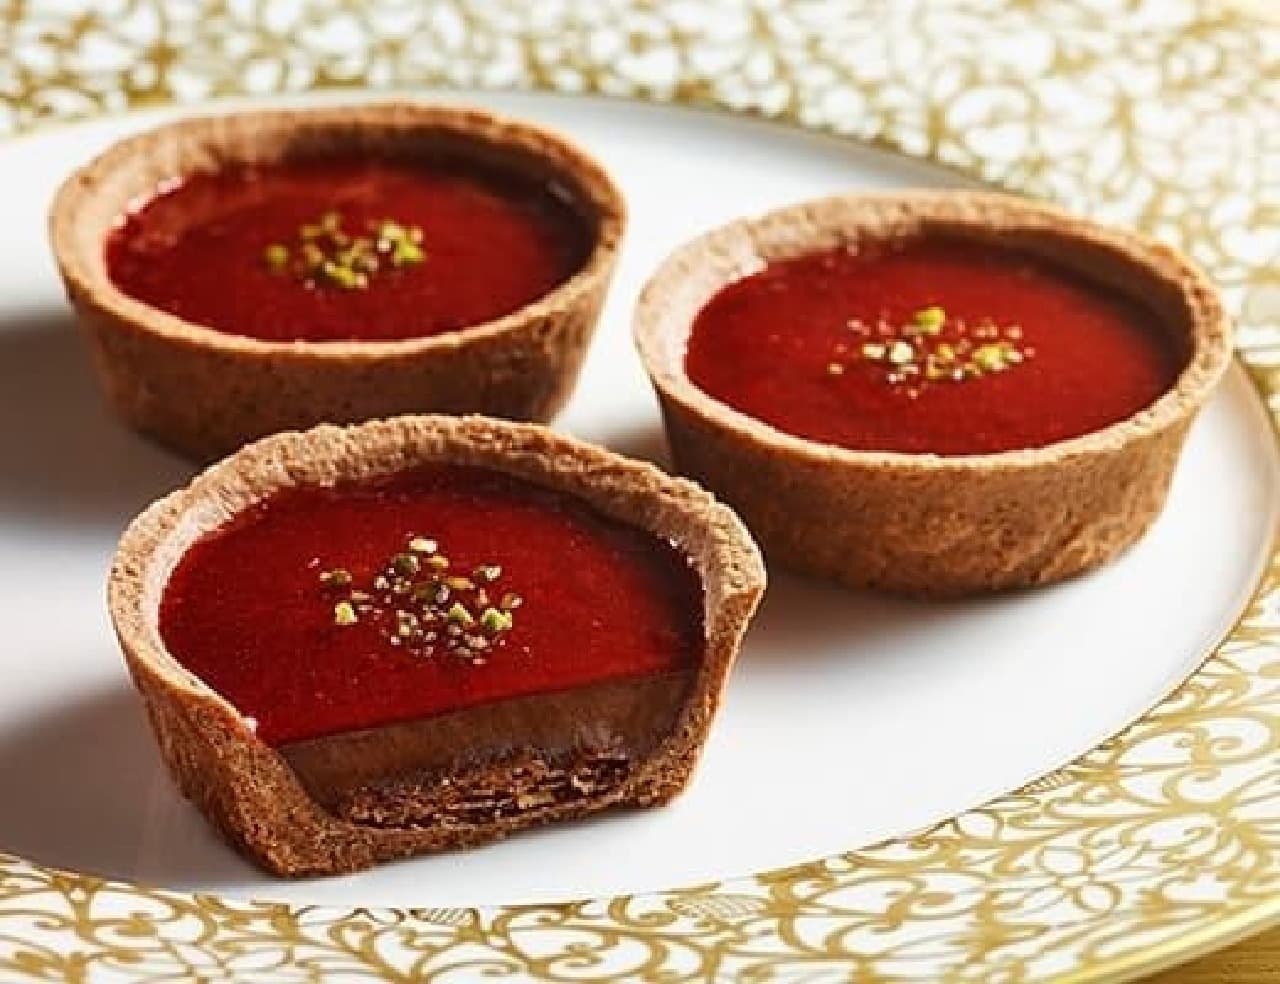 Lawson with Christmas color "berry chocolate tart"